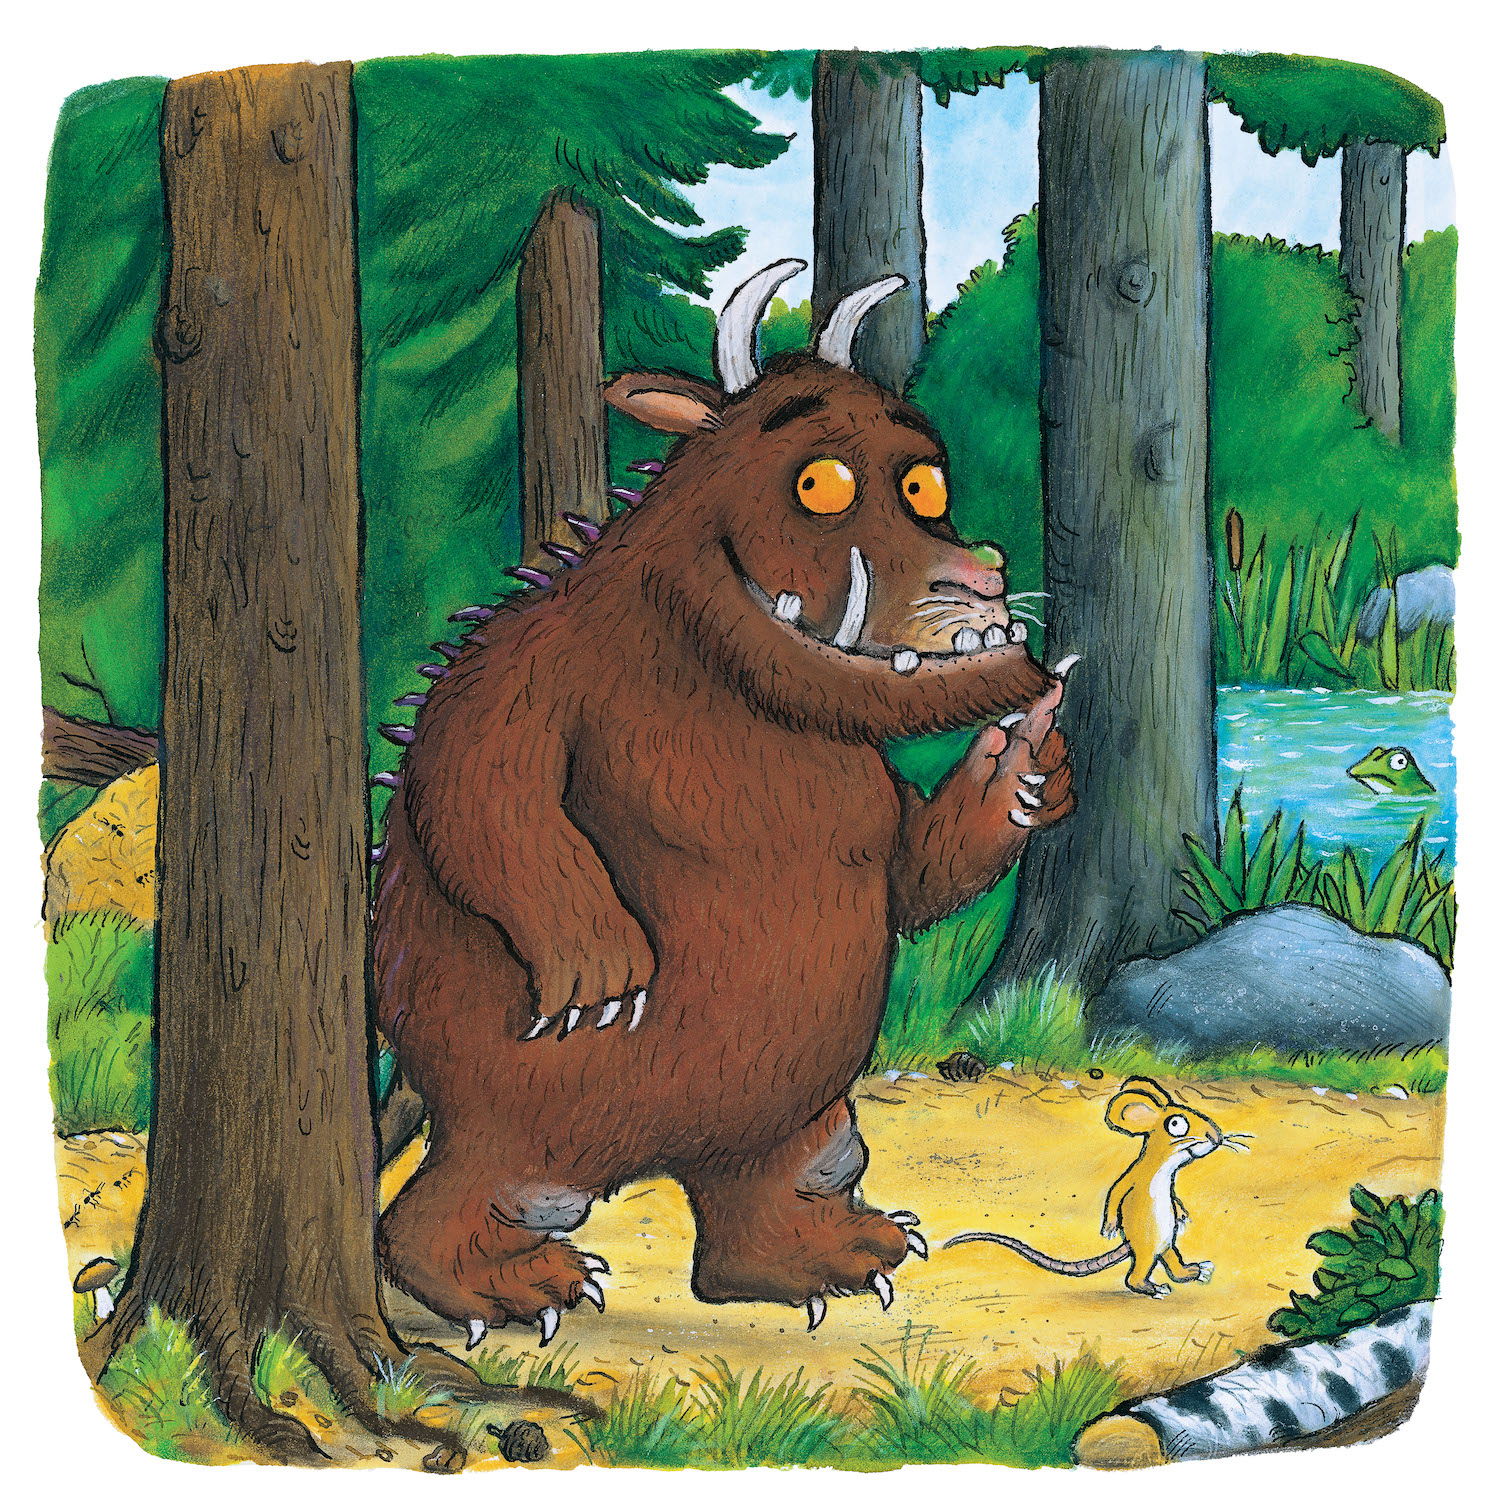 Mondo TV appointed licensing agent for The Gruffalo in Italy, Spain and Portugal image